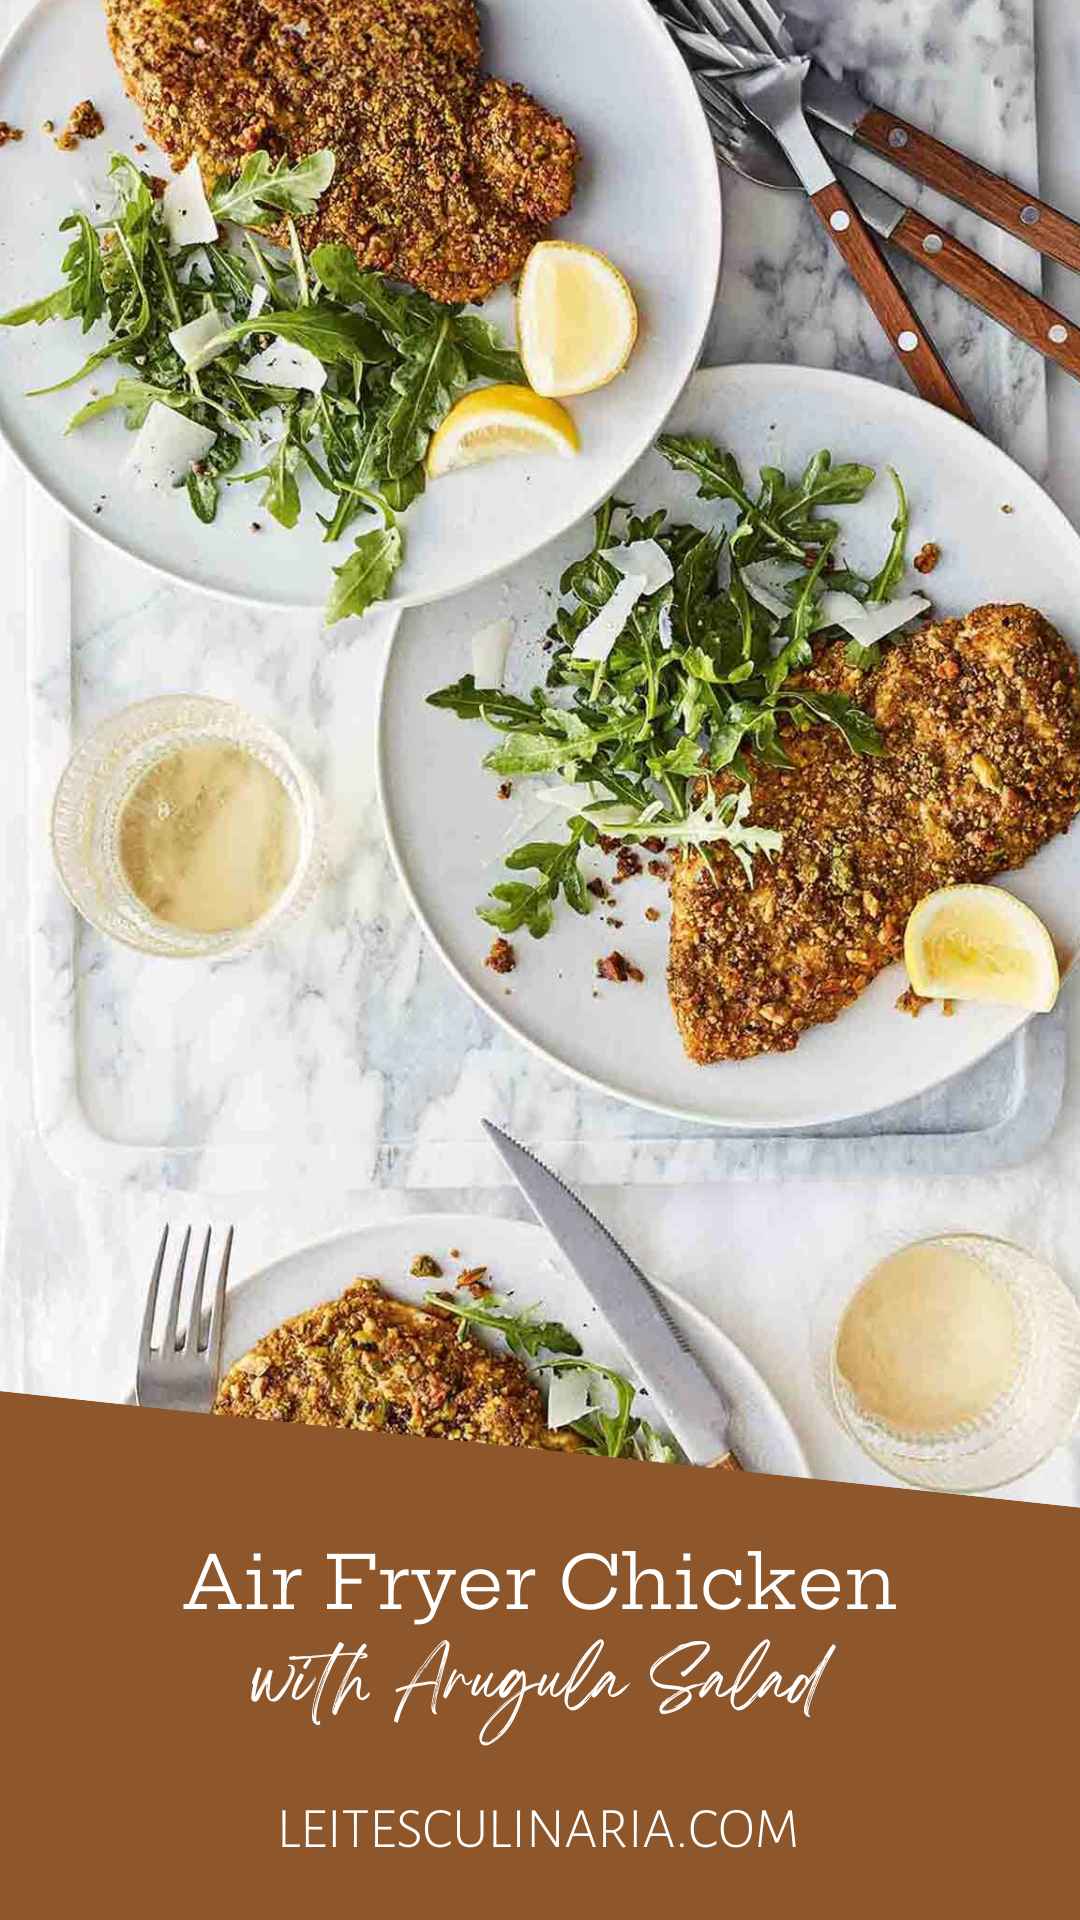 Three plates with a pistachio-crusted chicken cutlet, a lemon wedge, and an arugula and Parmesan salad on each one.